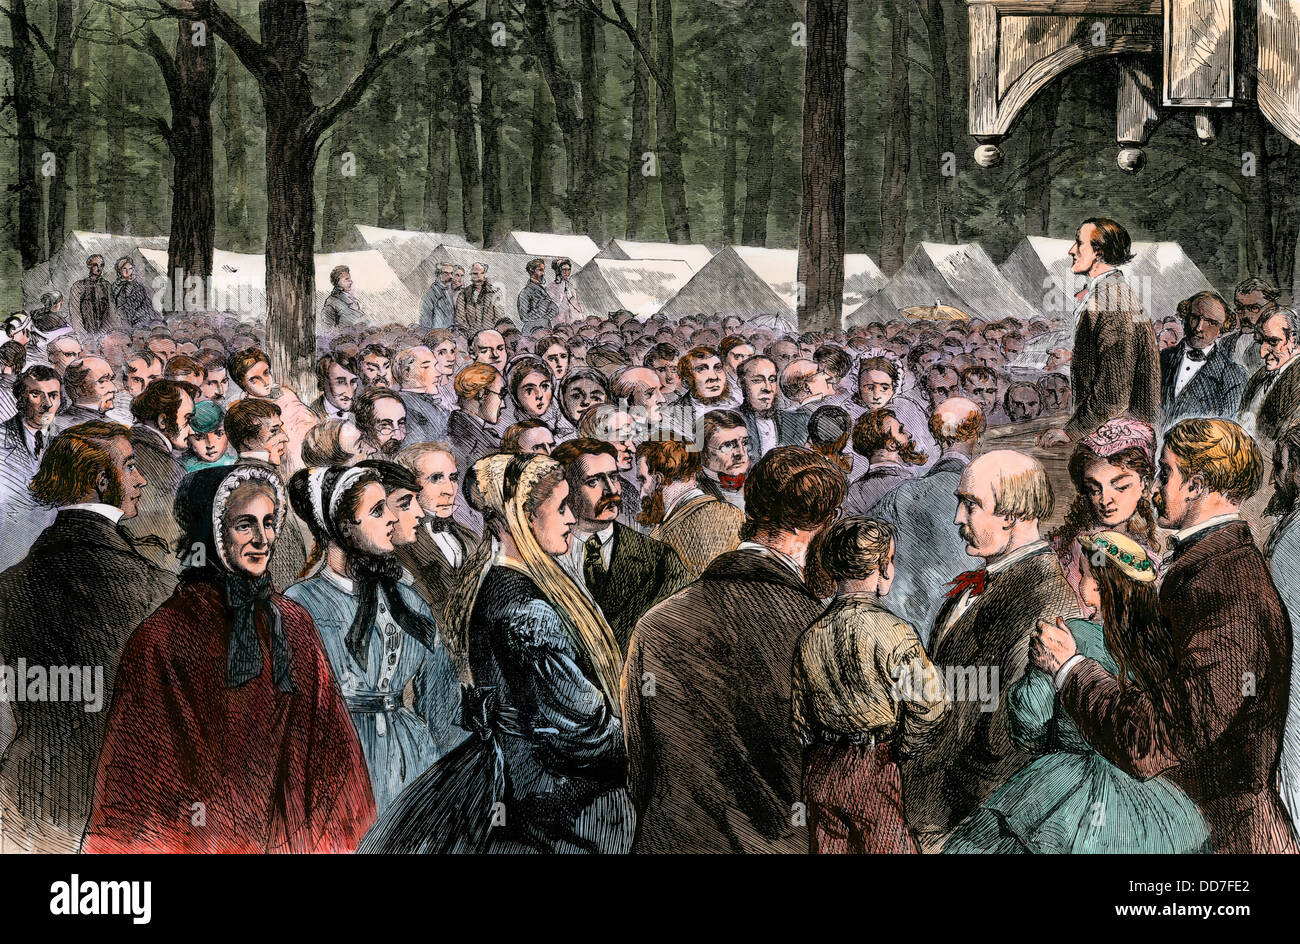 Methodist camp-meeting at Sing-Sing, New York, 1868. Hand-colored woodcut Stock Photo